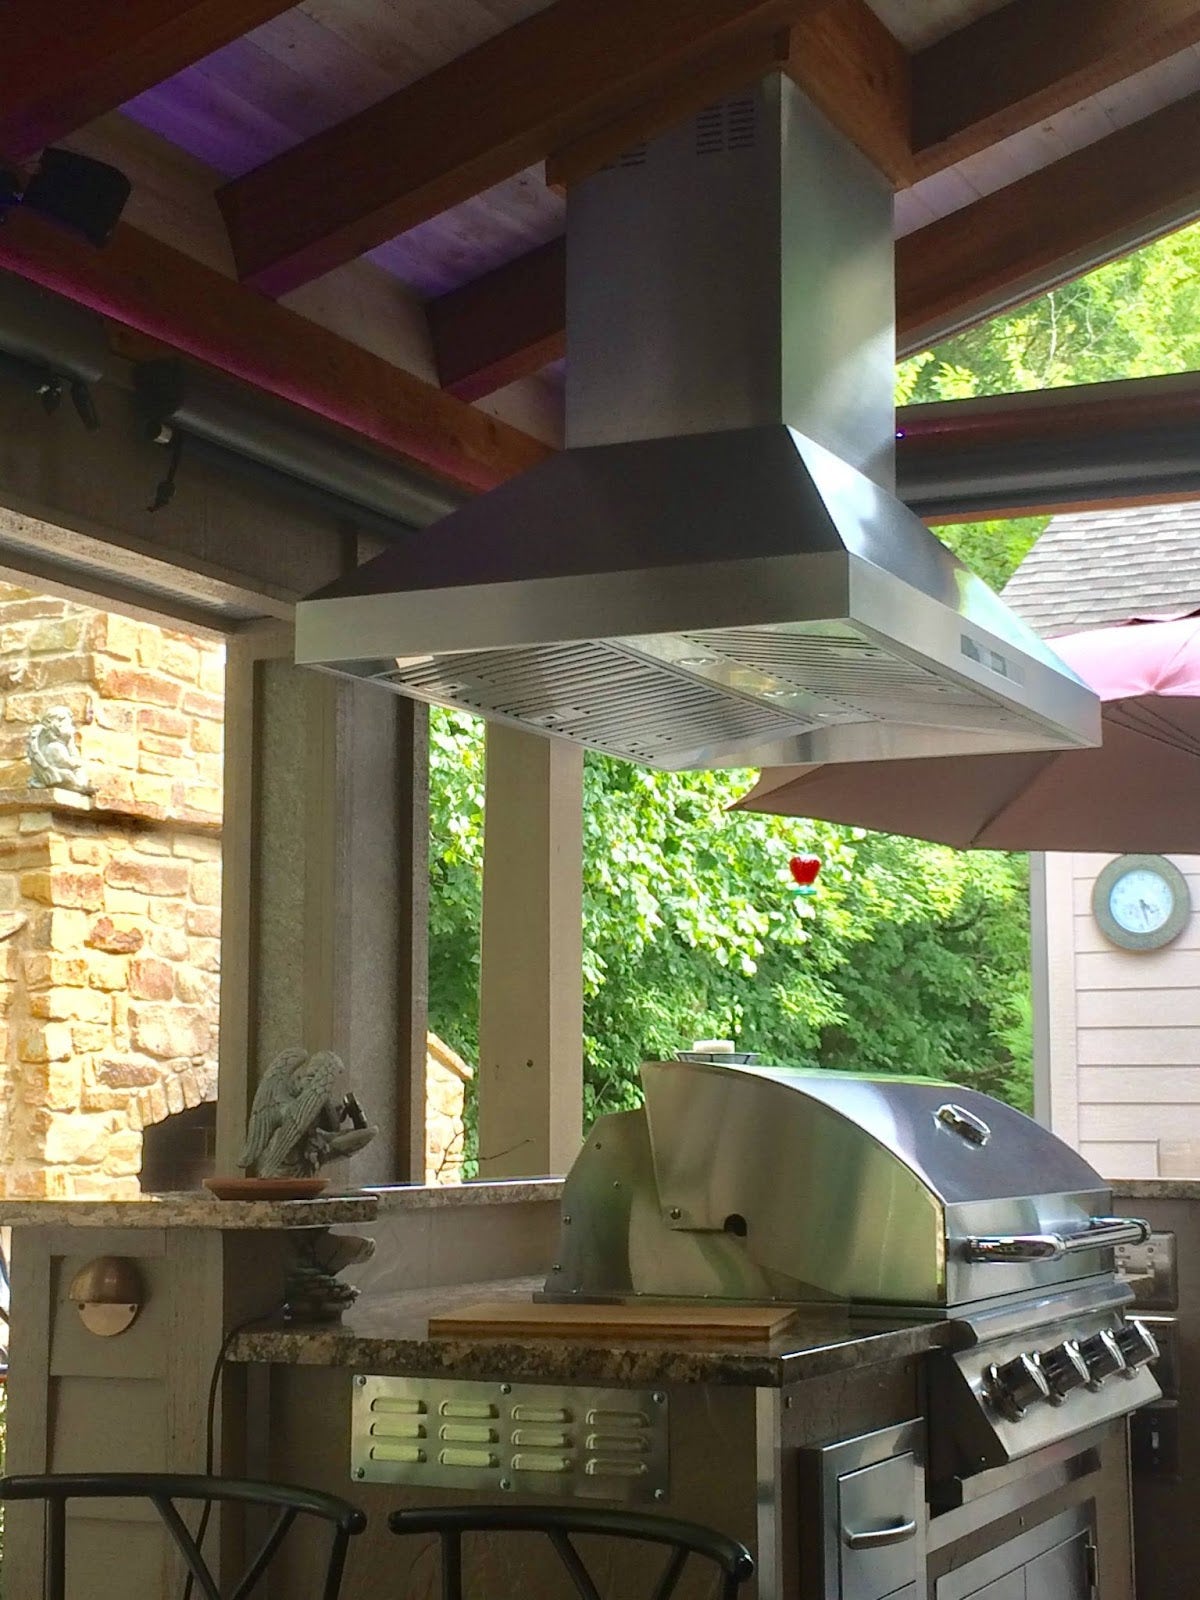 Outdoor kitchen setup with stainless steel grill under a large vent hood on a patio with exposed wooden beams. - Proline Range Hoods - prolinerangehoods.com 